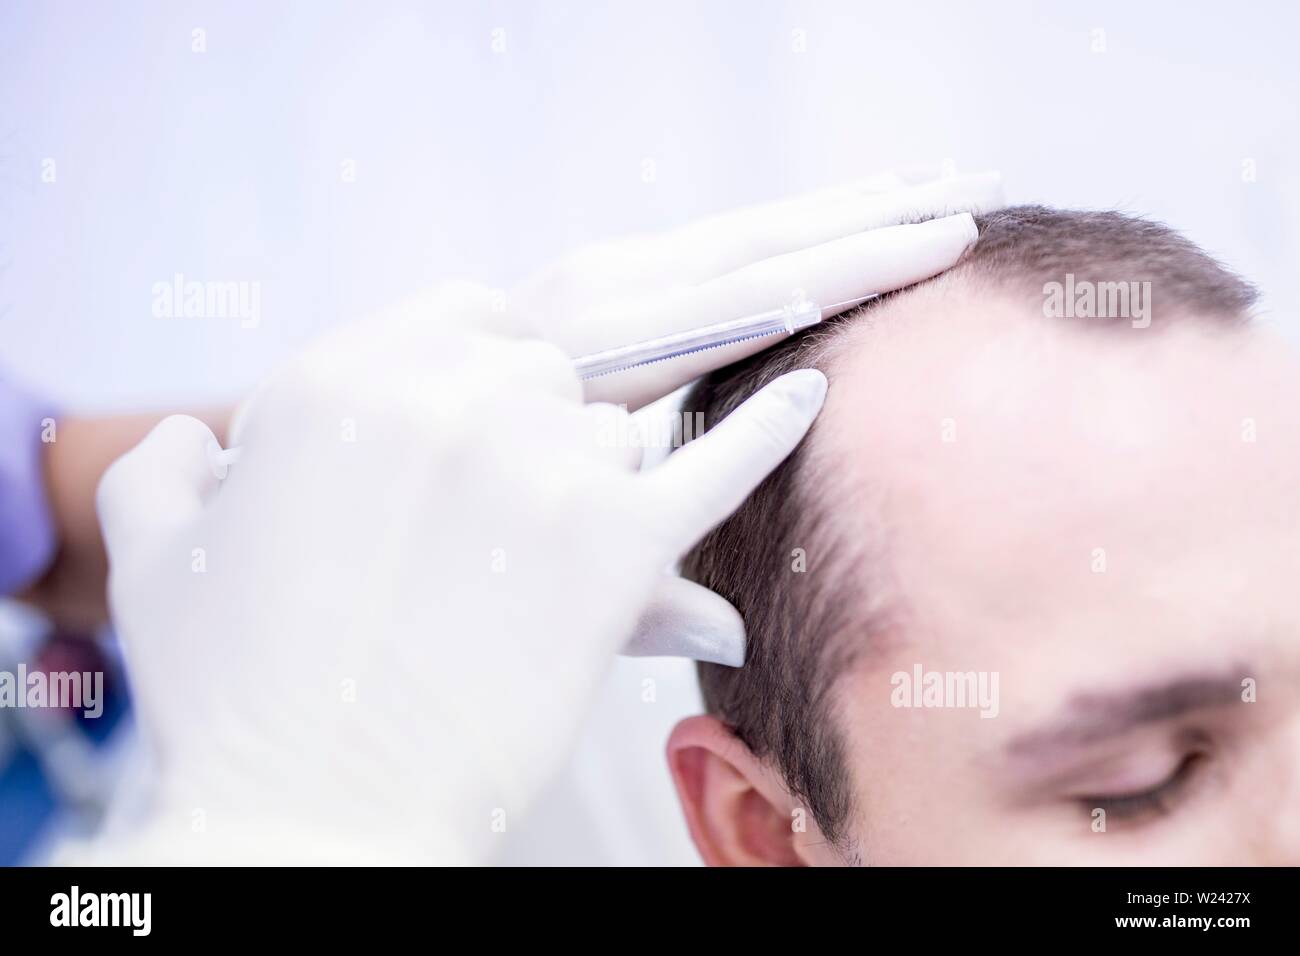 Young man having plasma re-application in scalp for trichology treatment, close-up. Stock Photo